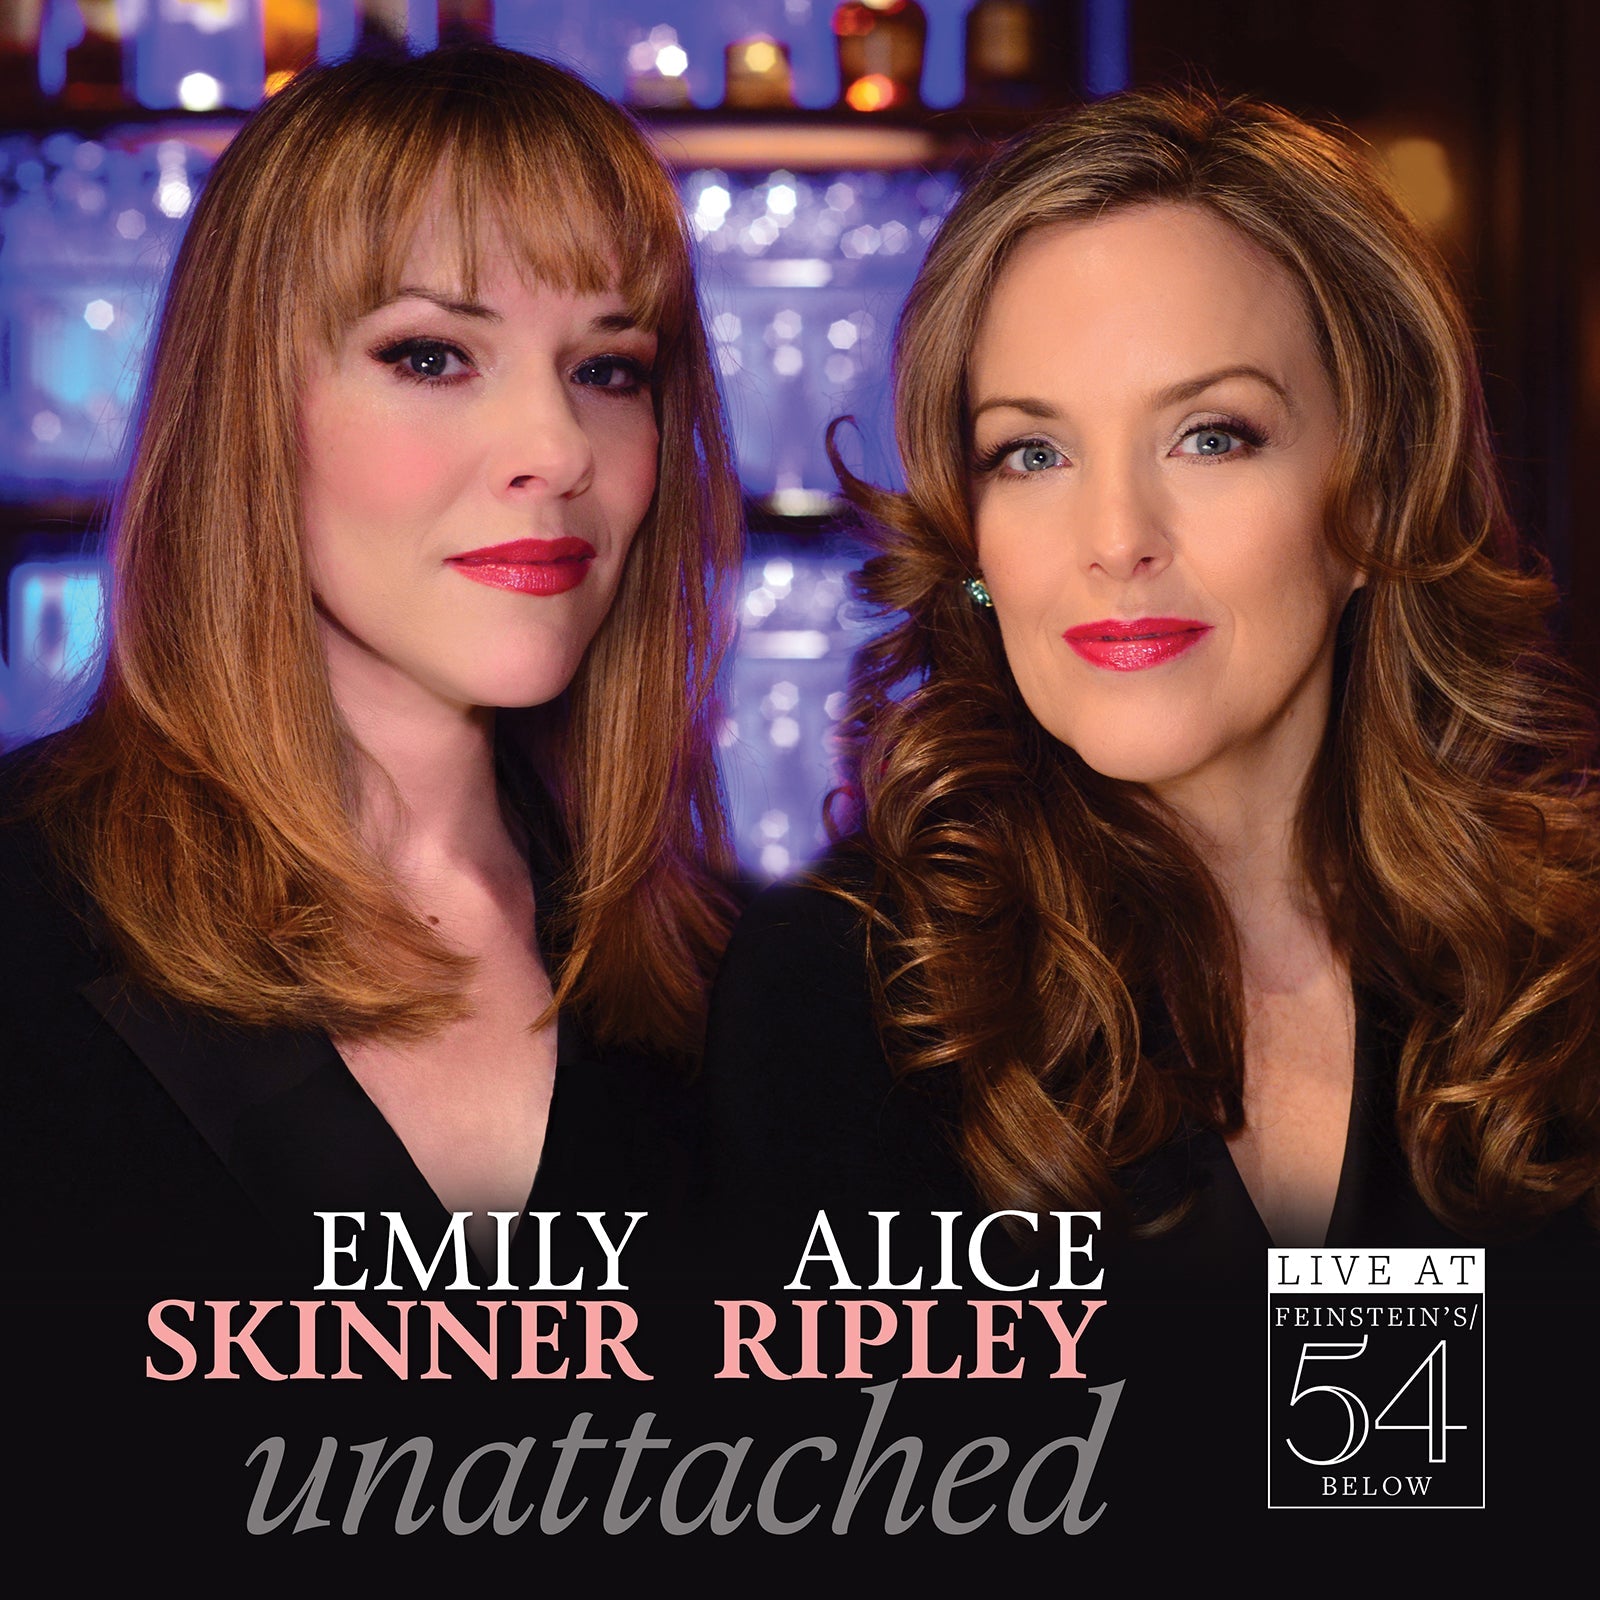 Emily Skinner & Alice Ripley: Unattached – Live at Feinstein's/54 Below [MP3]